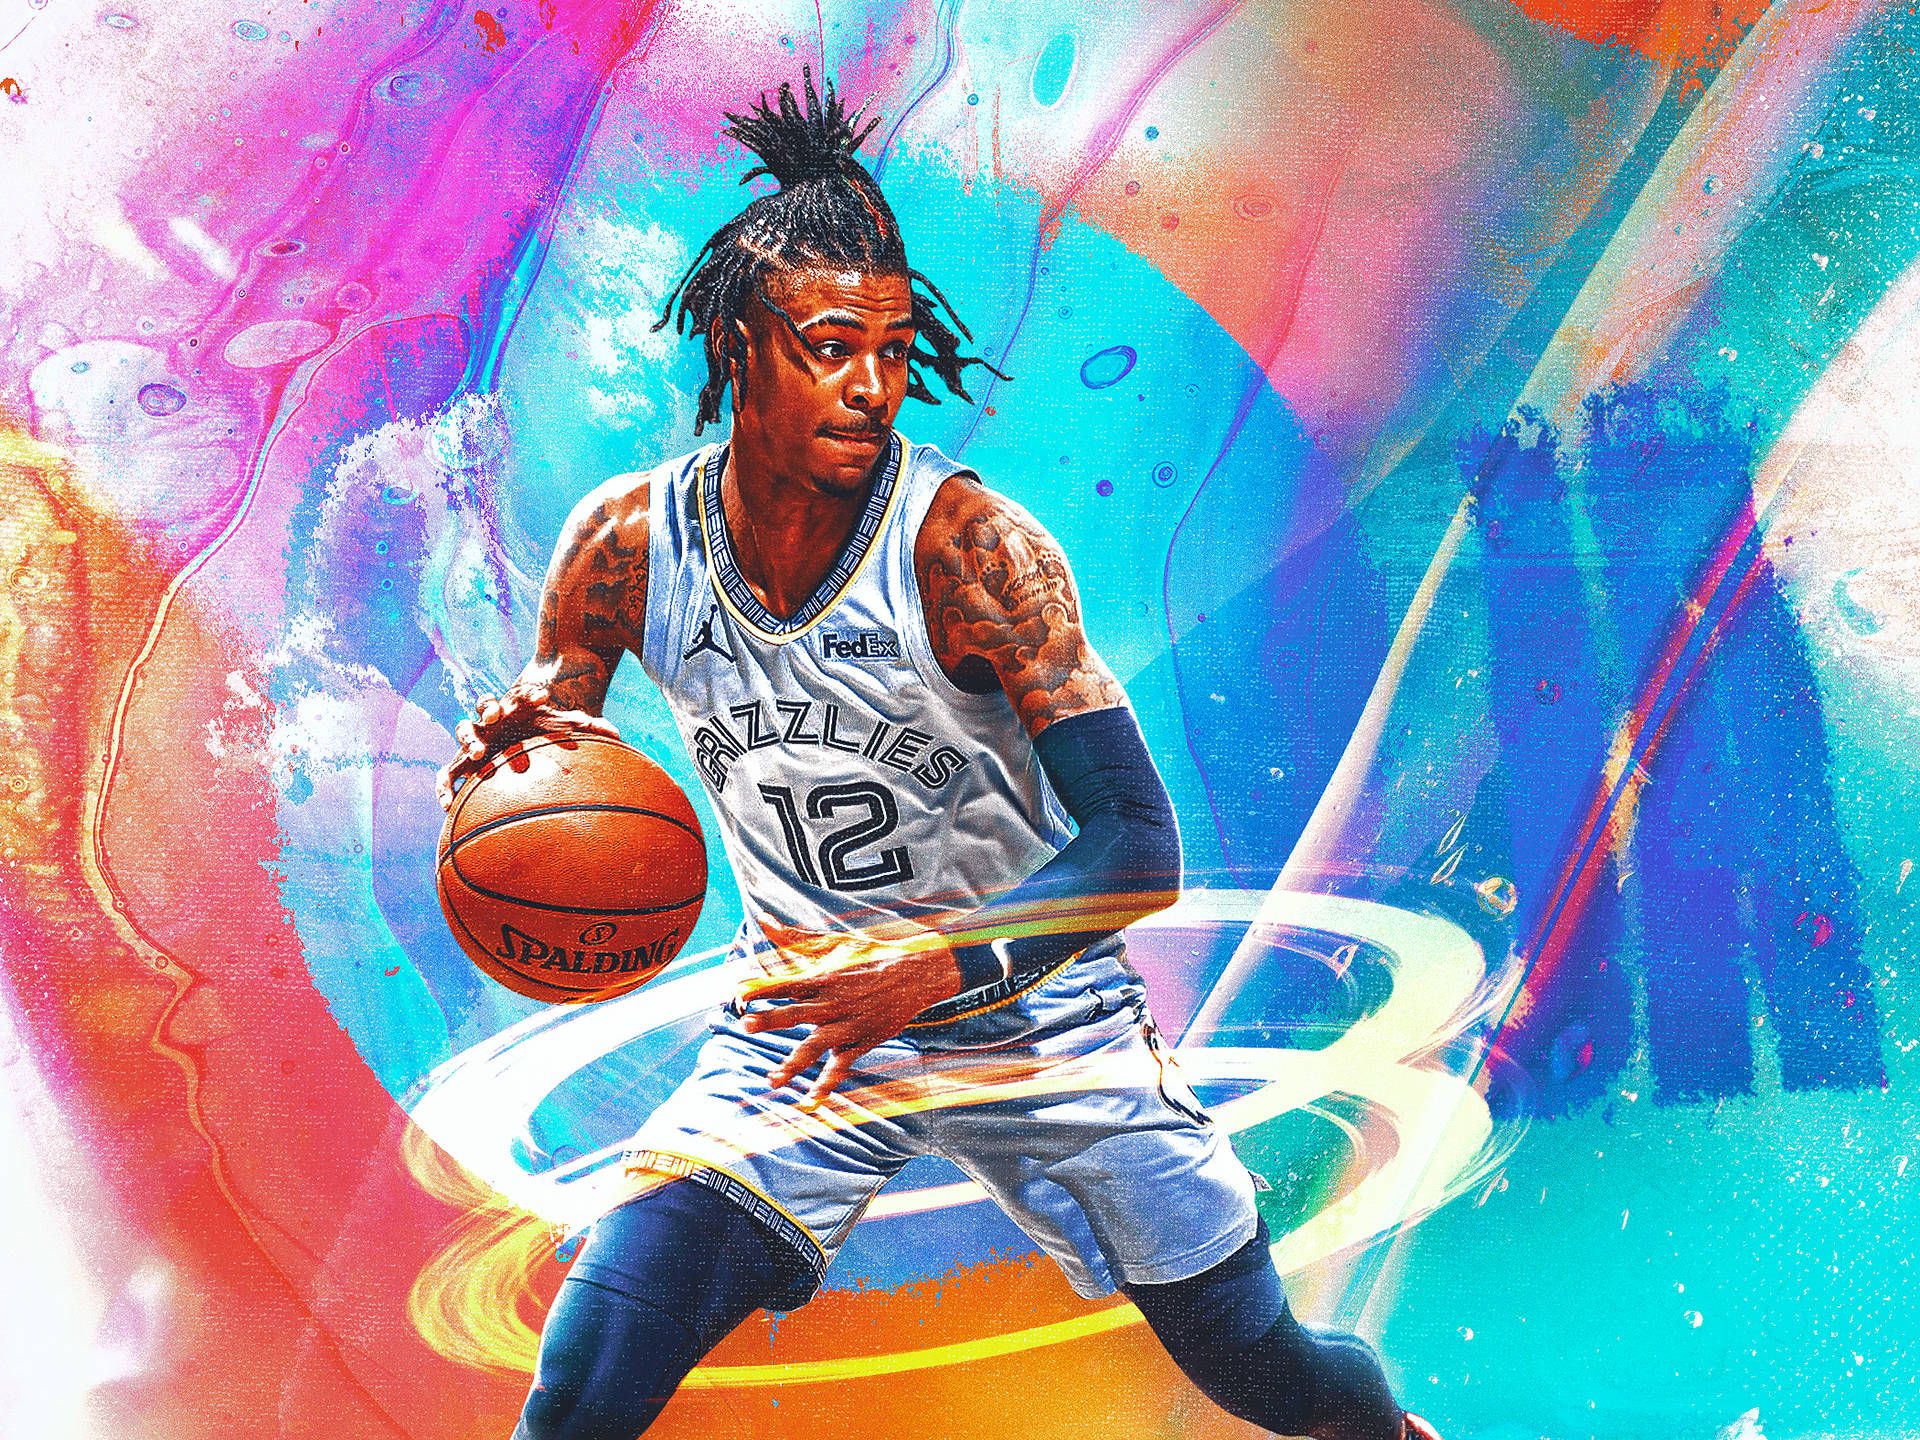 Ja Morant dribbling a basketball in front of a colorful background - Ja Morant